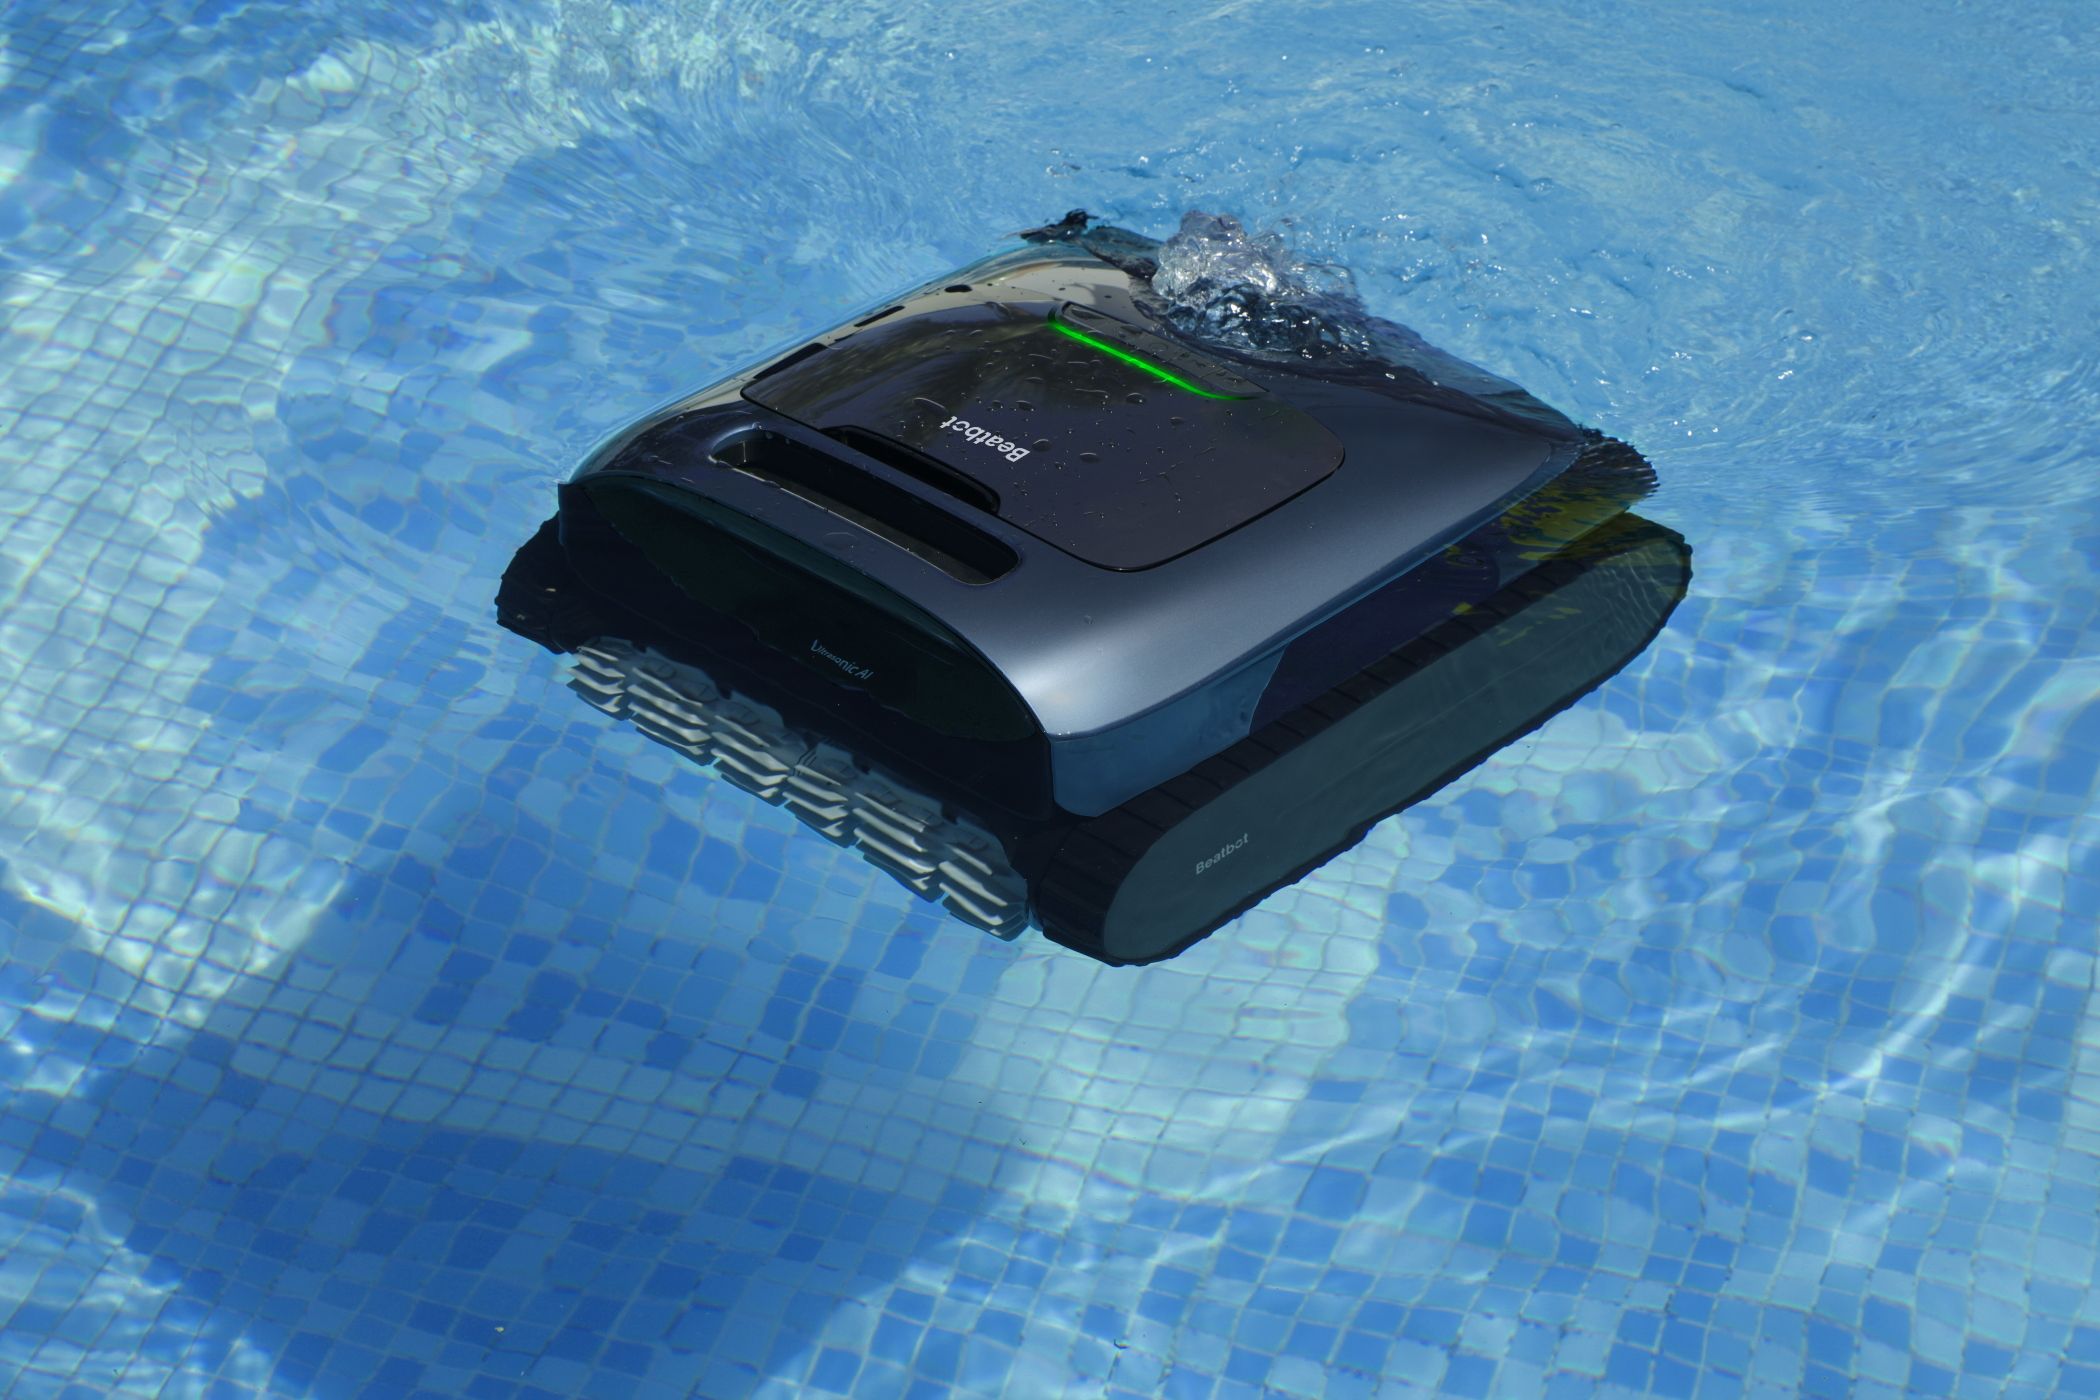 The Beatbot AquaSense Pro Floating atop a Pool While Cleaning